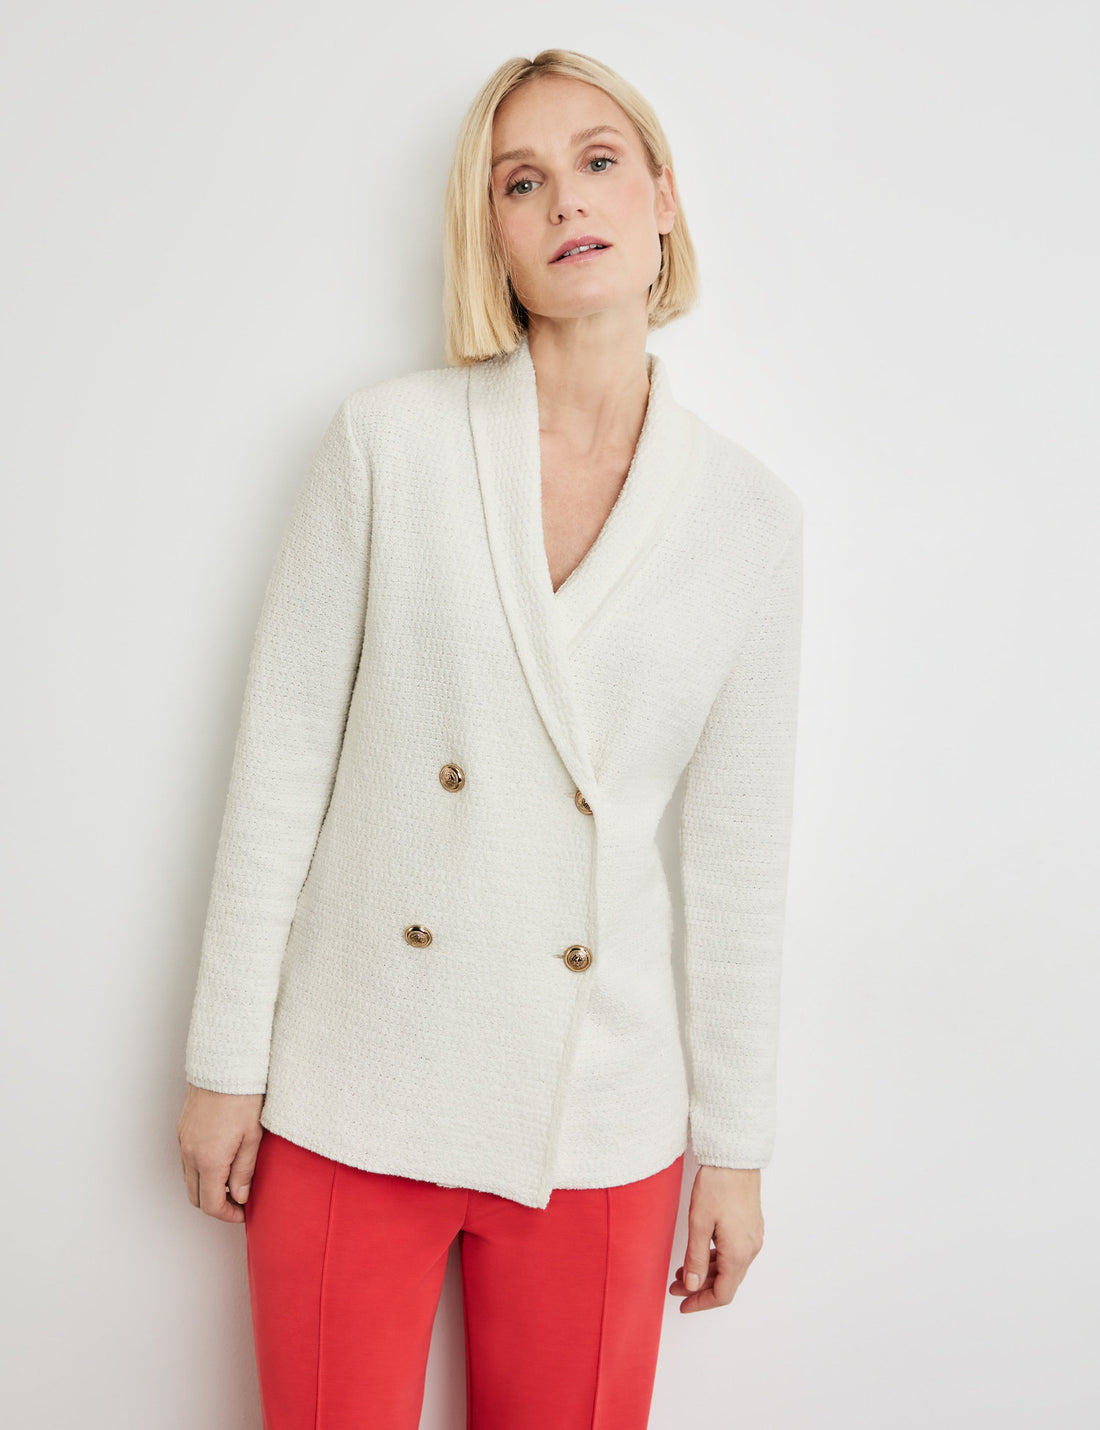 Cardigan In A Textured Knit With A Double-Breasted Button Placket_330019-35738_99700_01